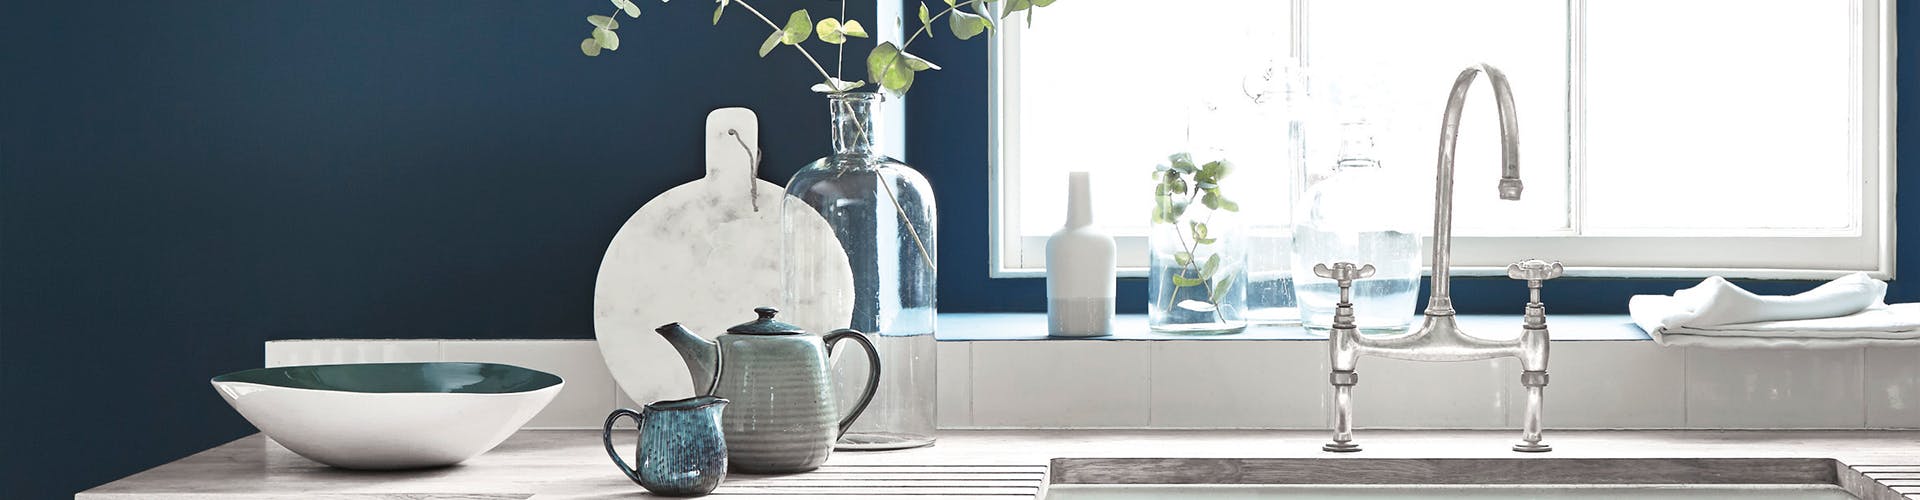 Close up of a kitchen painted in dark blue (Hicks' Blue) with white countertop and sink, in front of a large window.